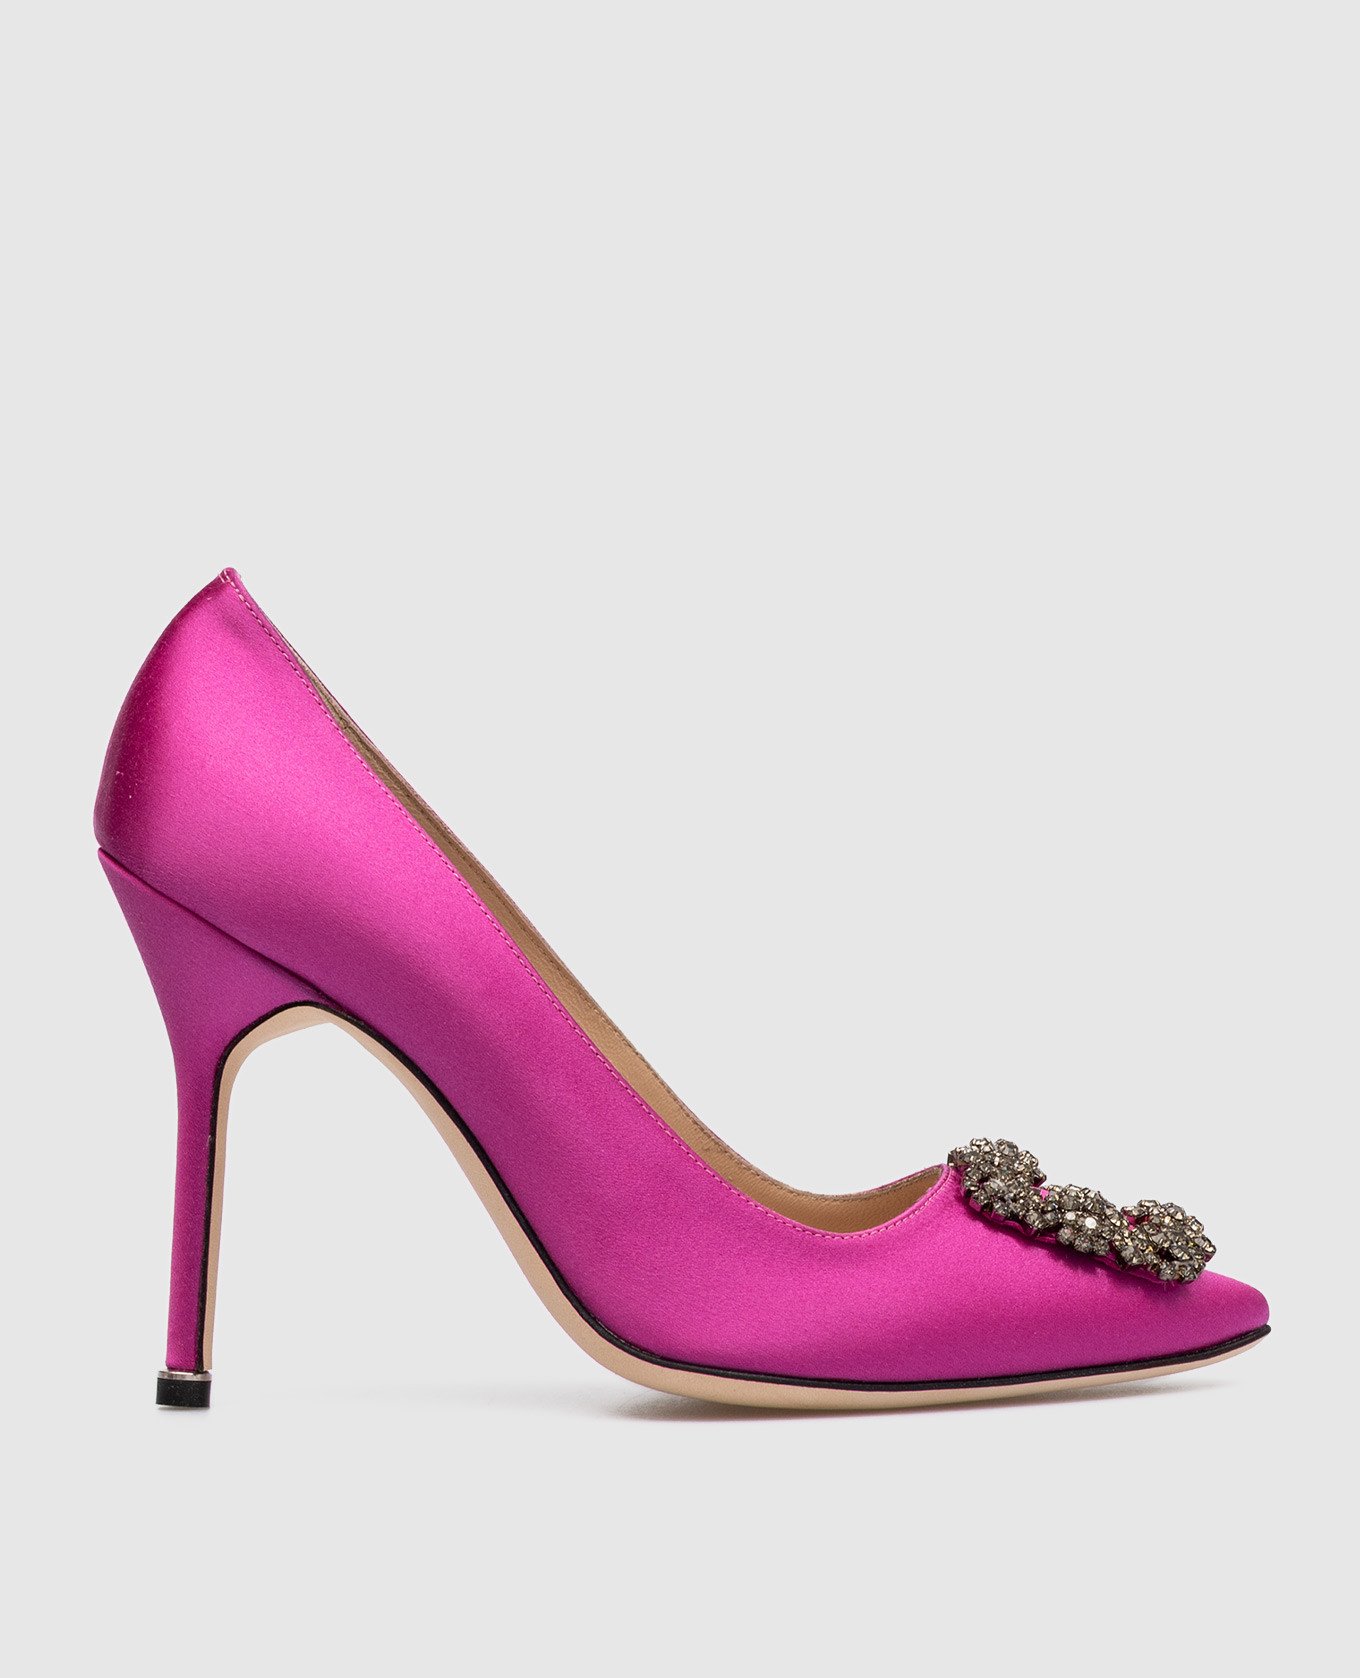 Pink Hangisi pumps with crystals